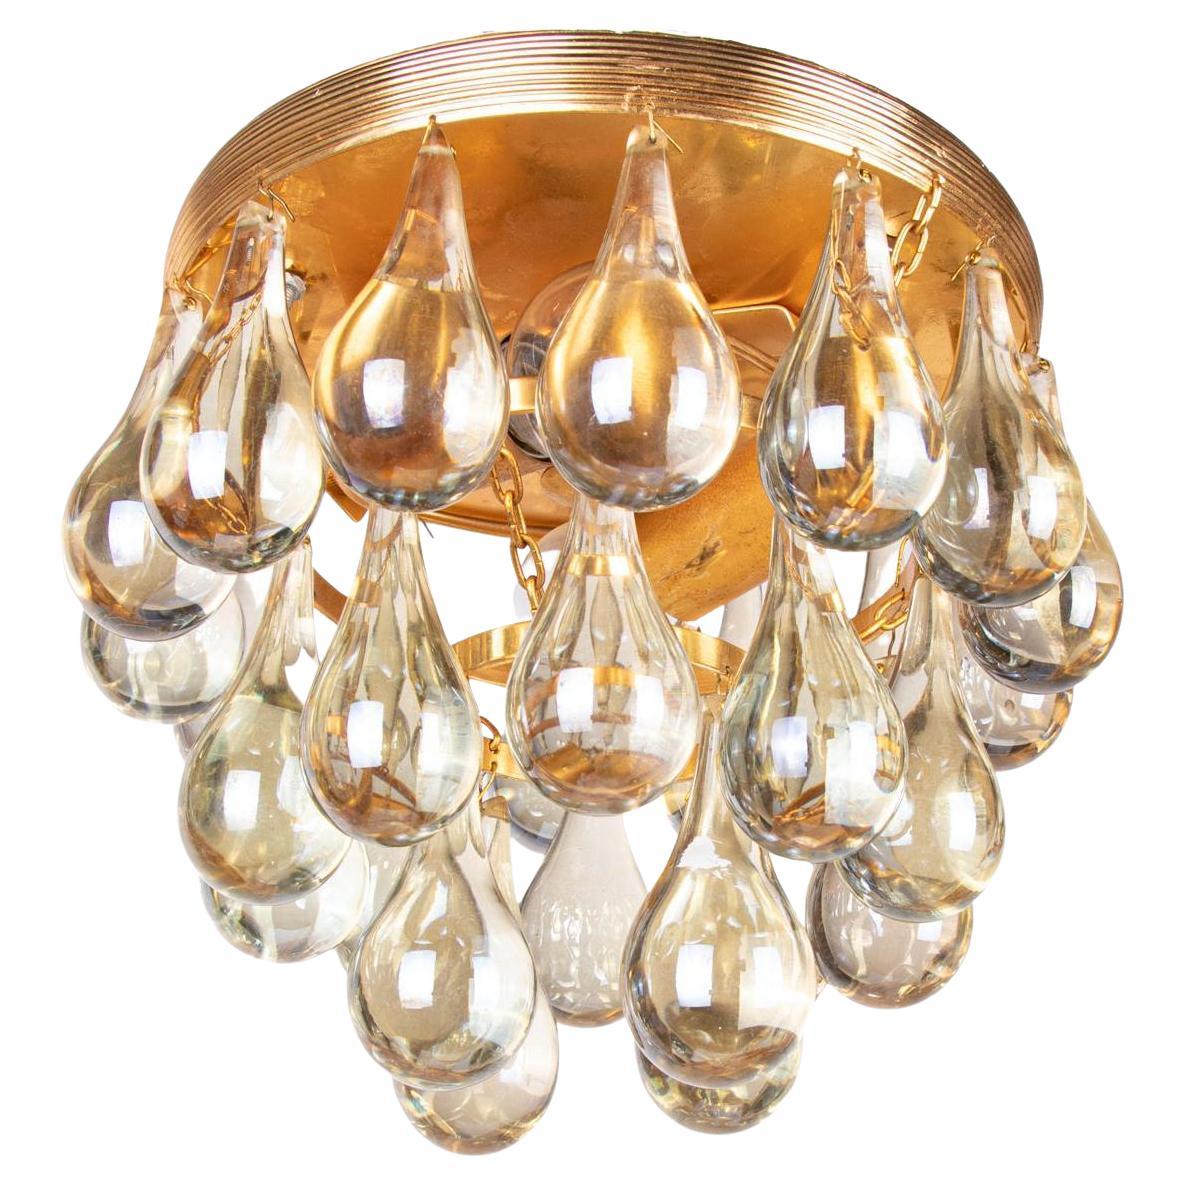 1 (of 3) Small 1960 Germany Palwa Flush Mount Chandelier Murano Glass Tear Drop For Sale